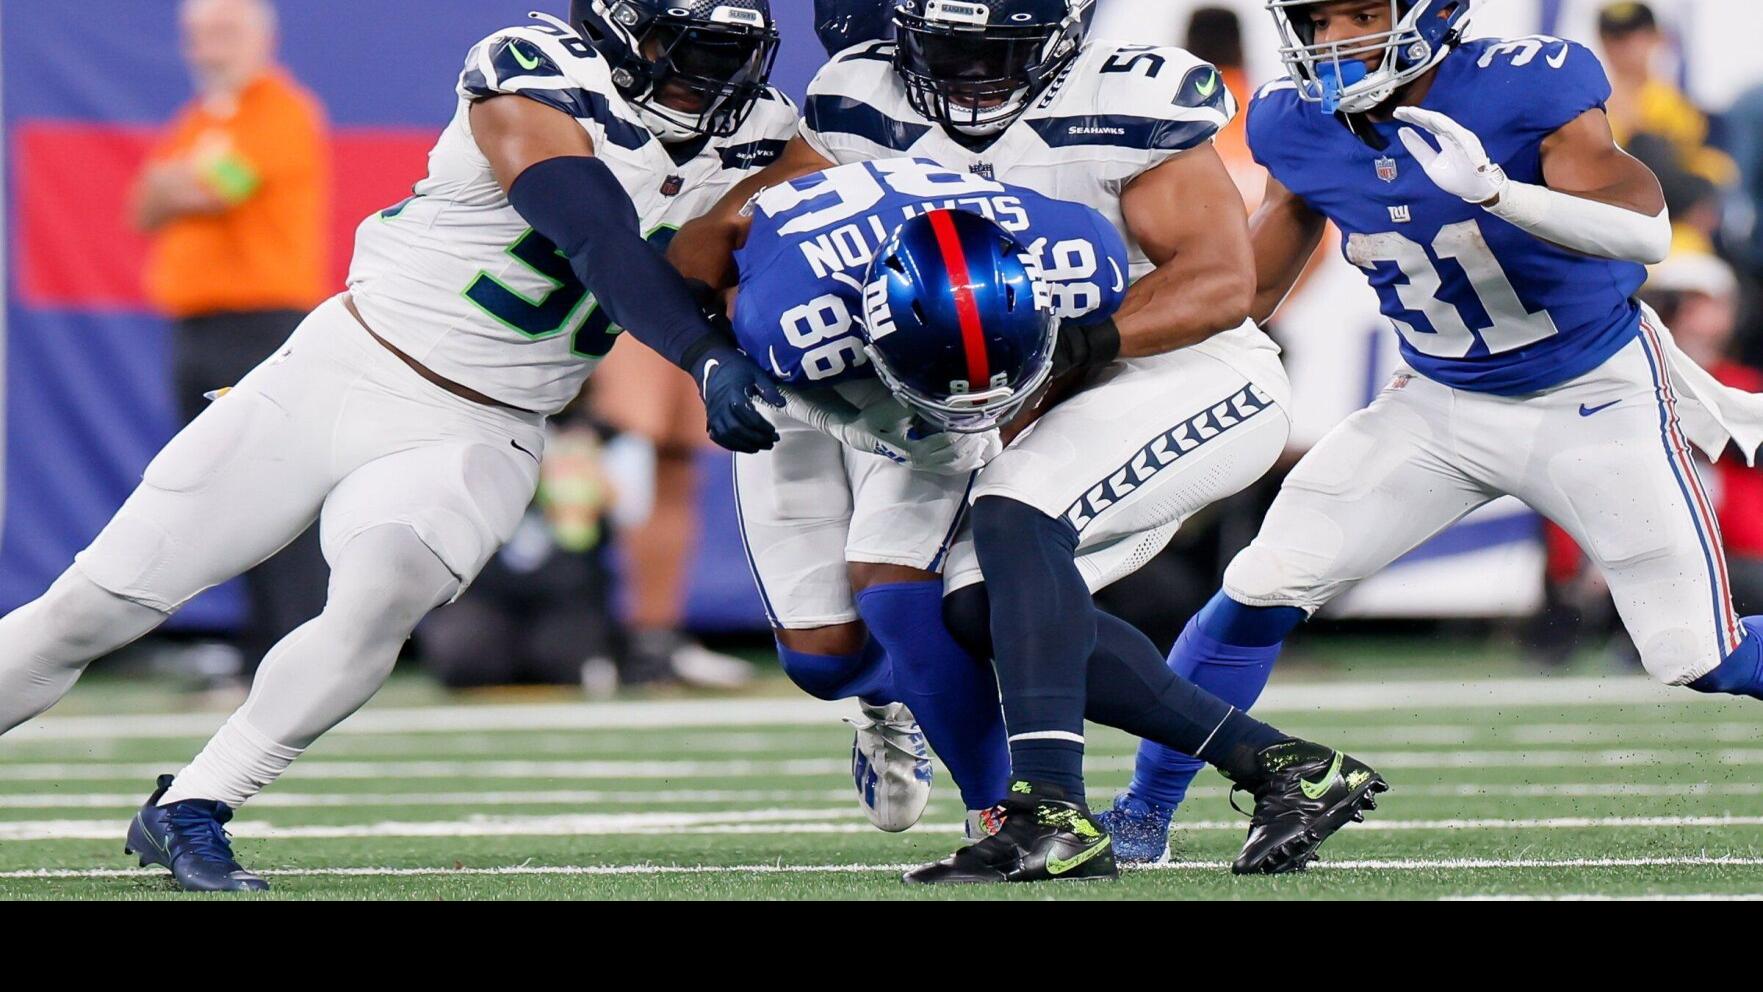 How to watch tonight's Seattle Seahawks vs. New York Giants game